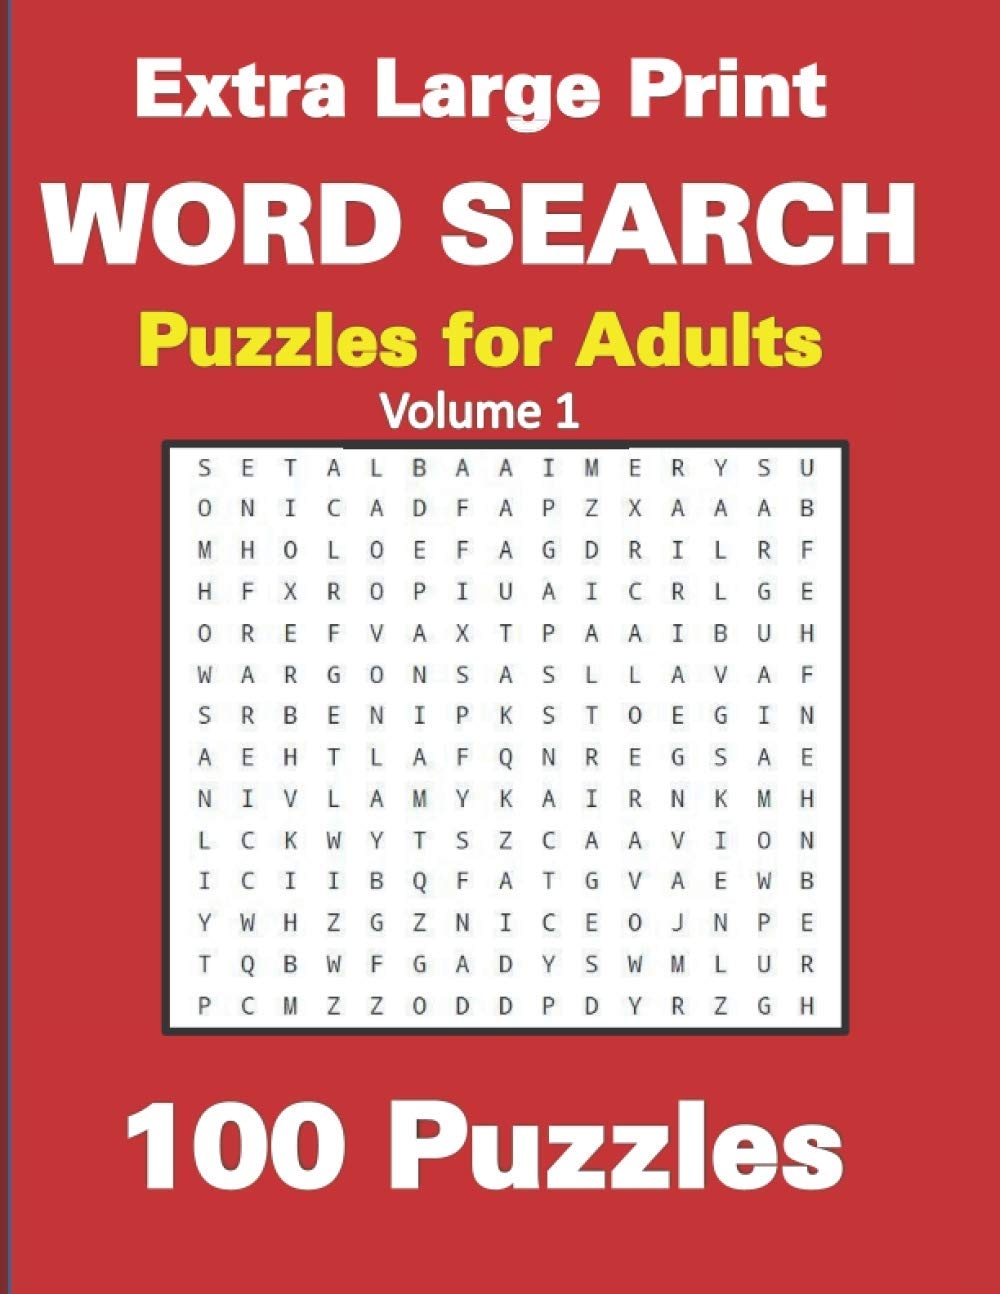 Extra Large Print Word Search Puzzles For Adults 100 Puzzles Word Search Plus Other Activities Hangman Connect Four Dots And Boxes Tic Tac Toe Ireland Costello 9798694875523 Books Amazon ca